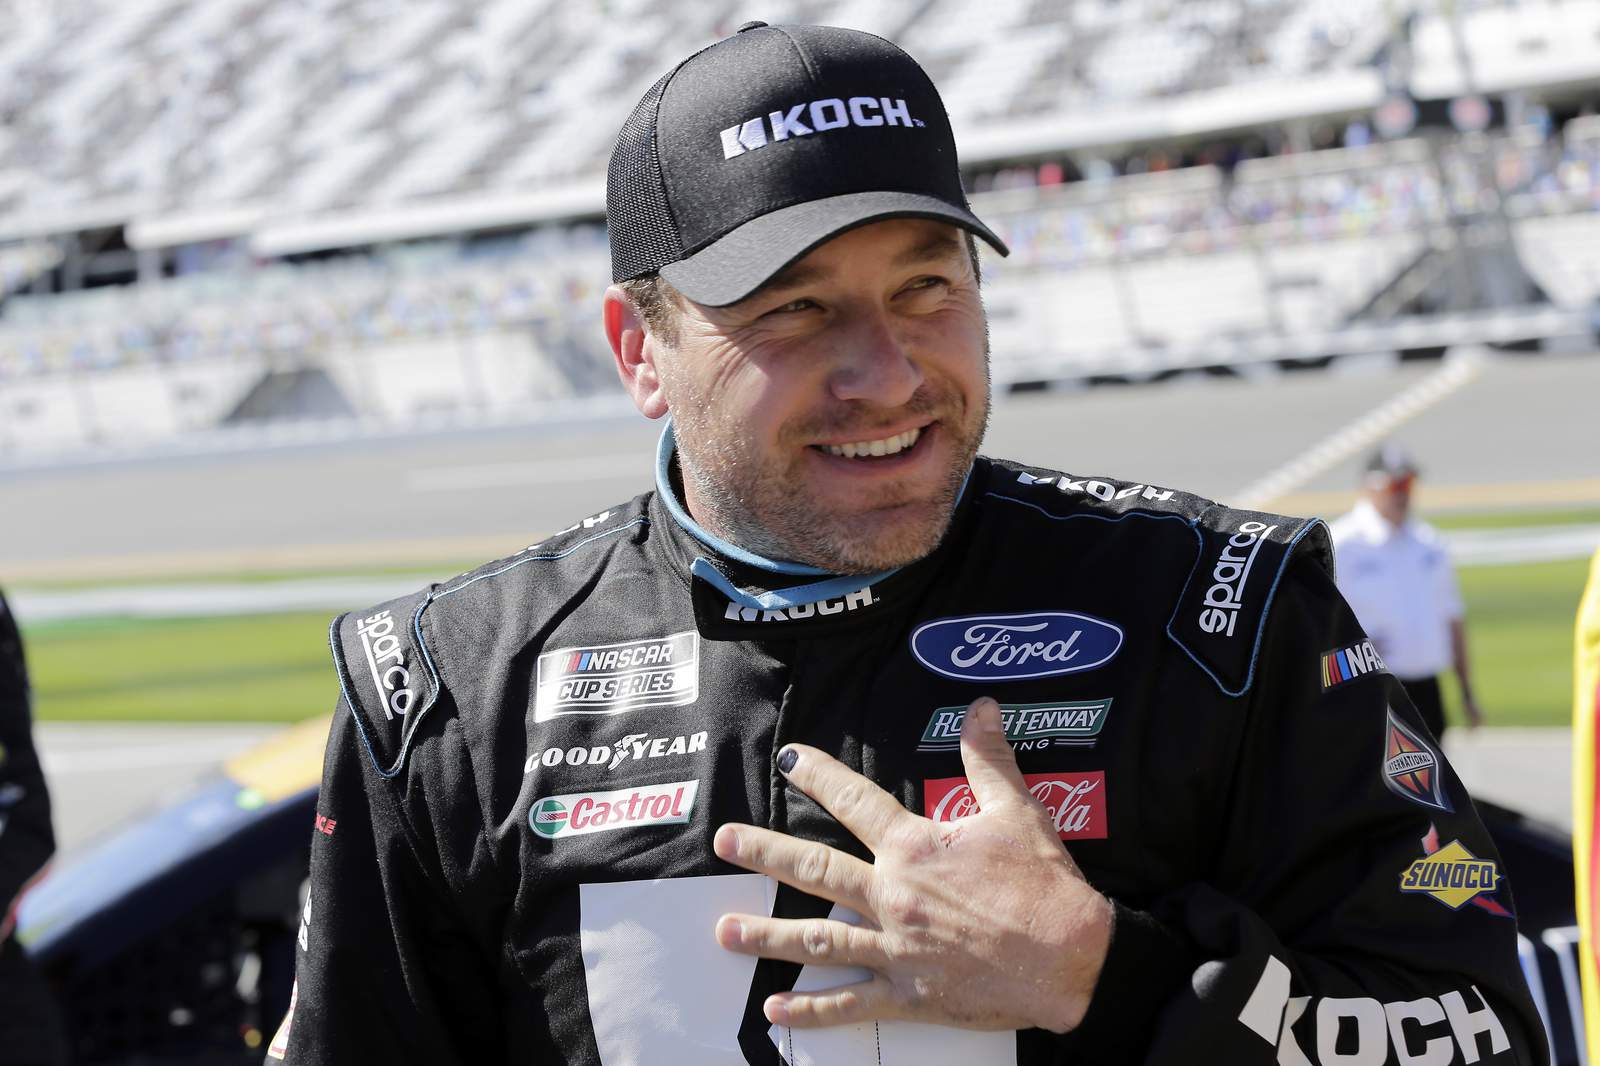 Newman: "Great to be alive" after terrifying Daytona wreck